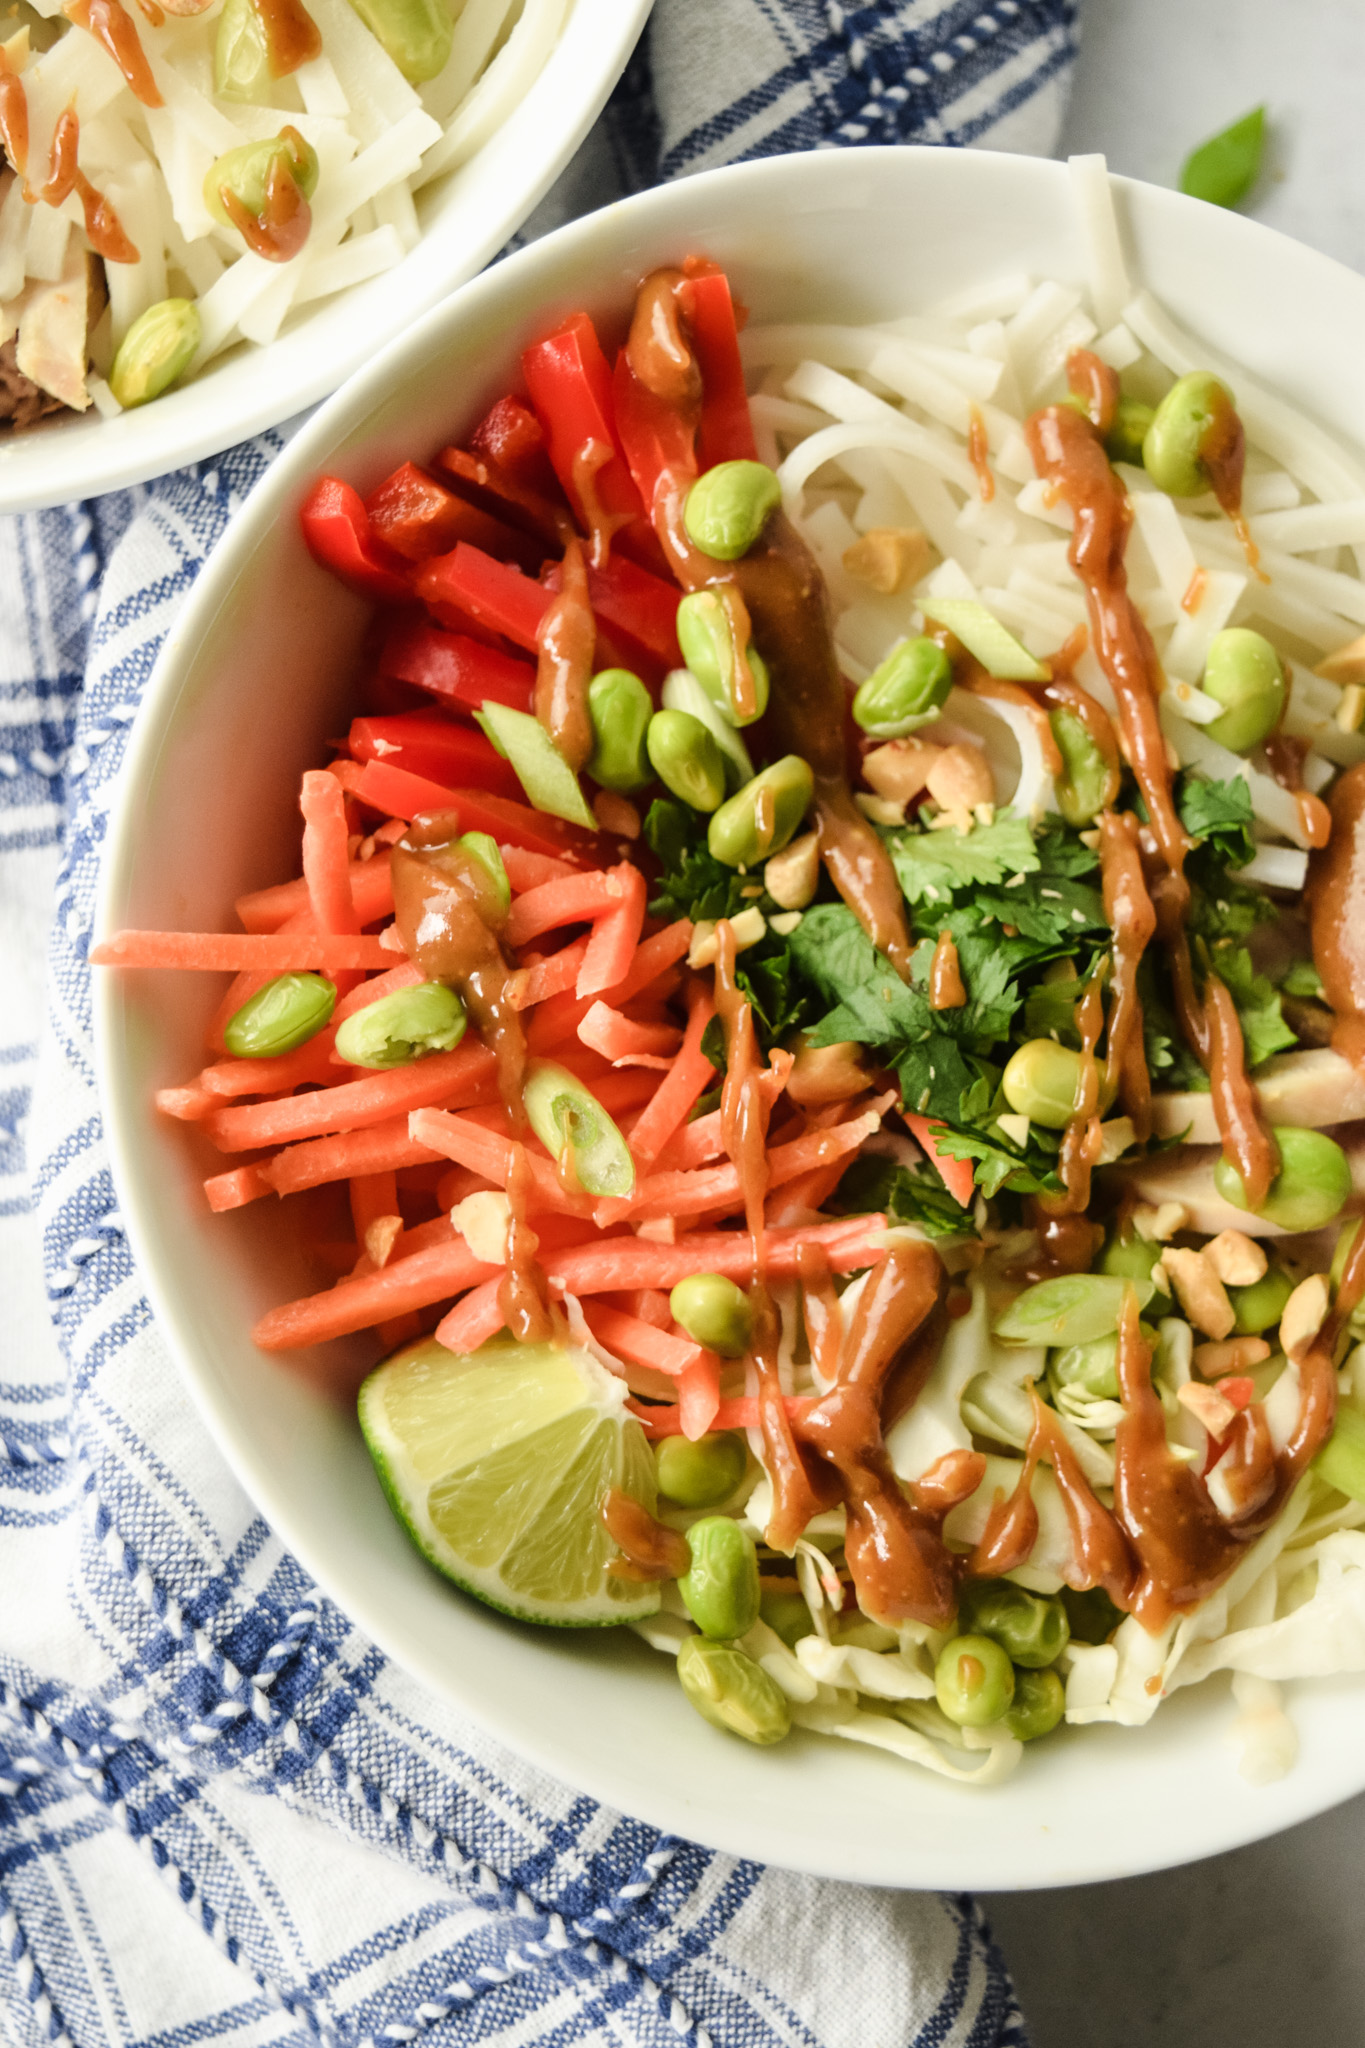 Gluten Free Thai Noodle salad with peppers, carrots, chicken, cilantro, and lime